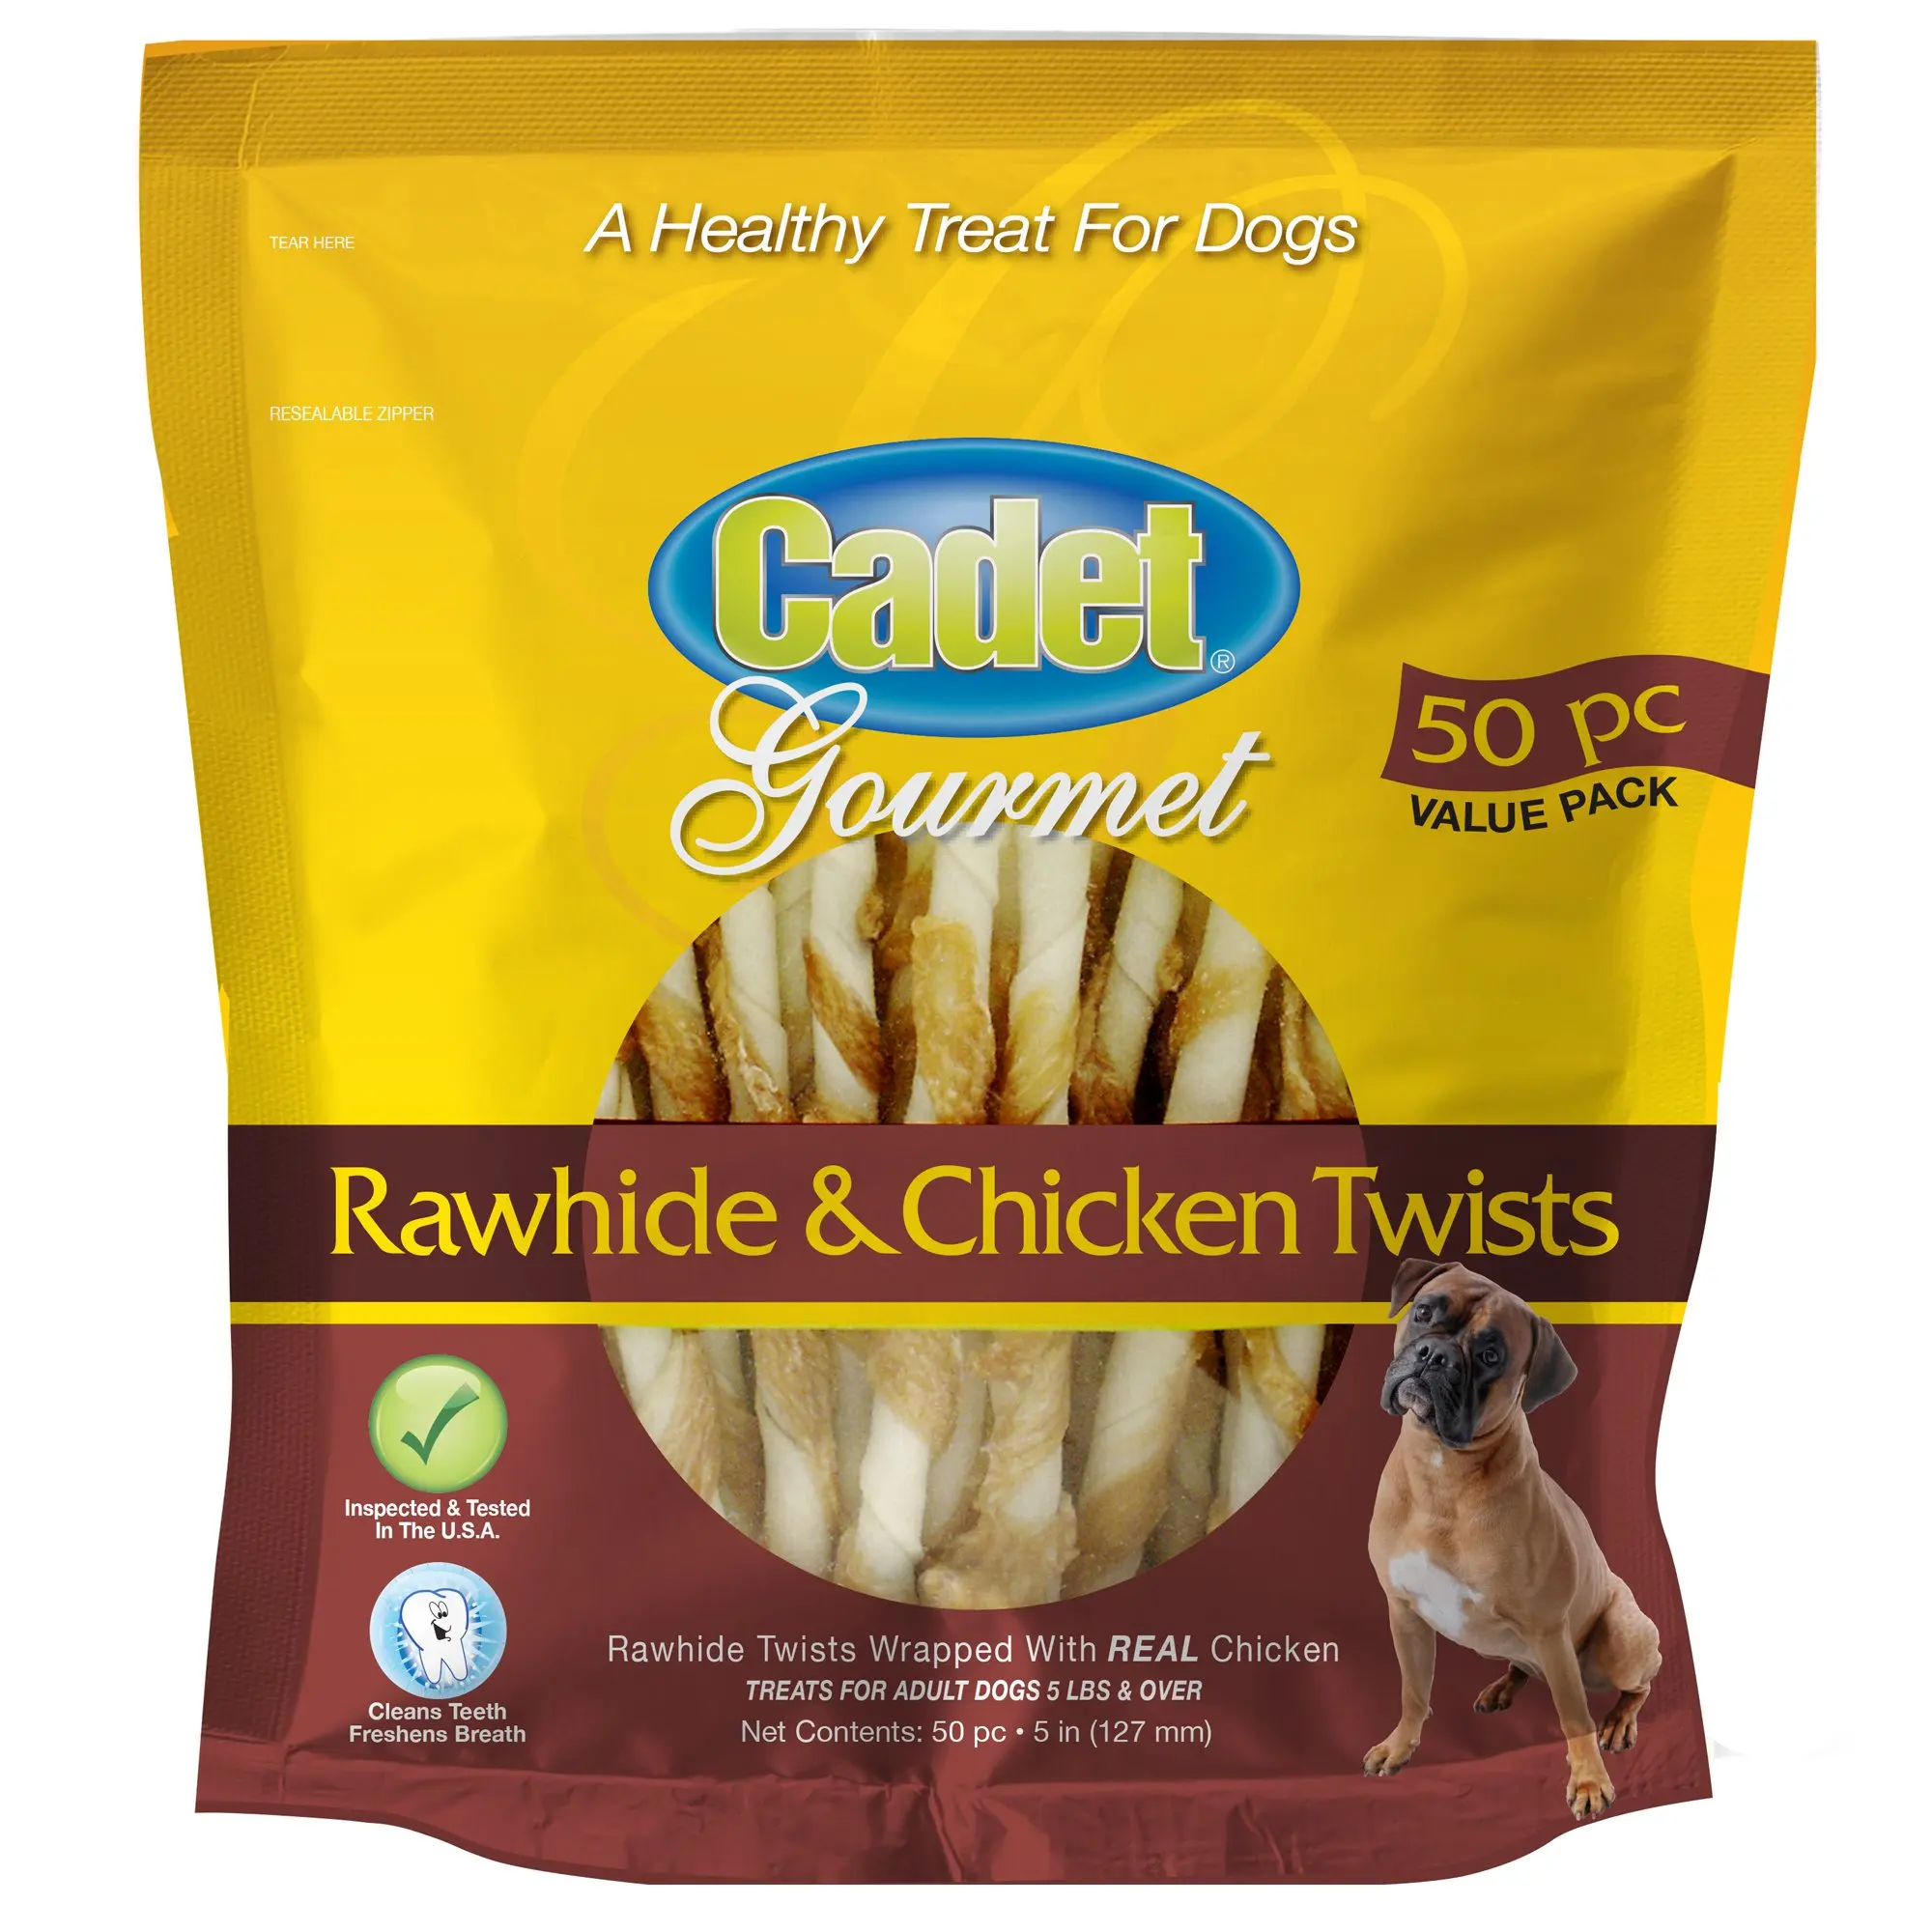 are rawhide chews good for dogs